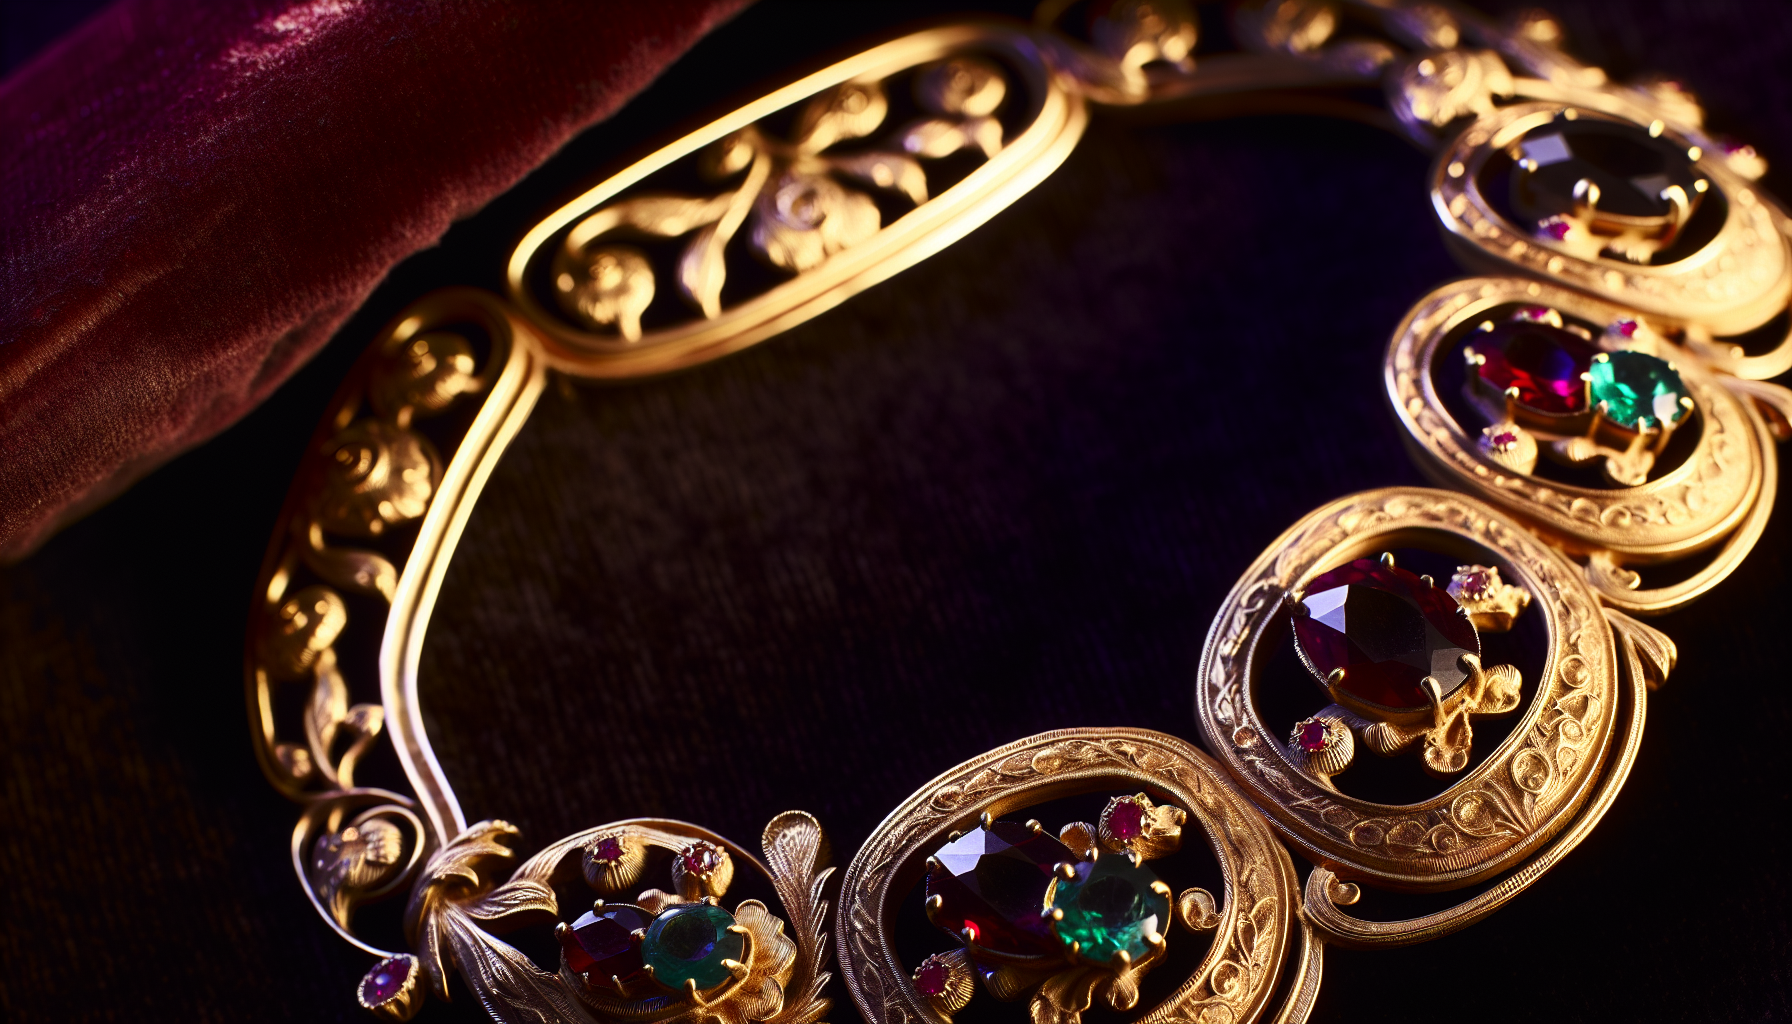 An elegant antique jewelry piece with intricate details